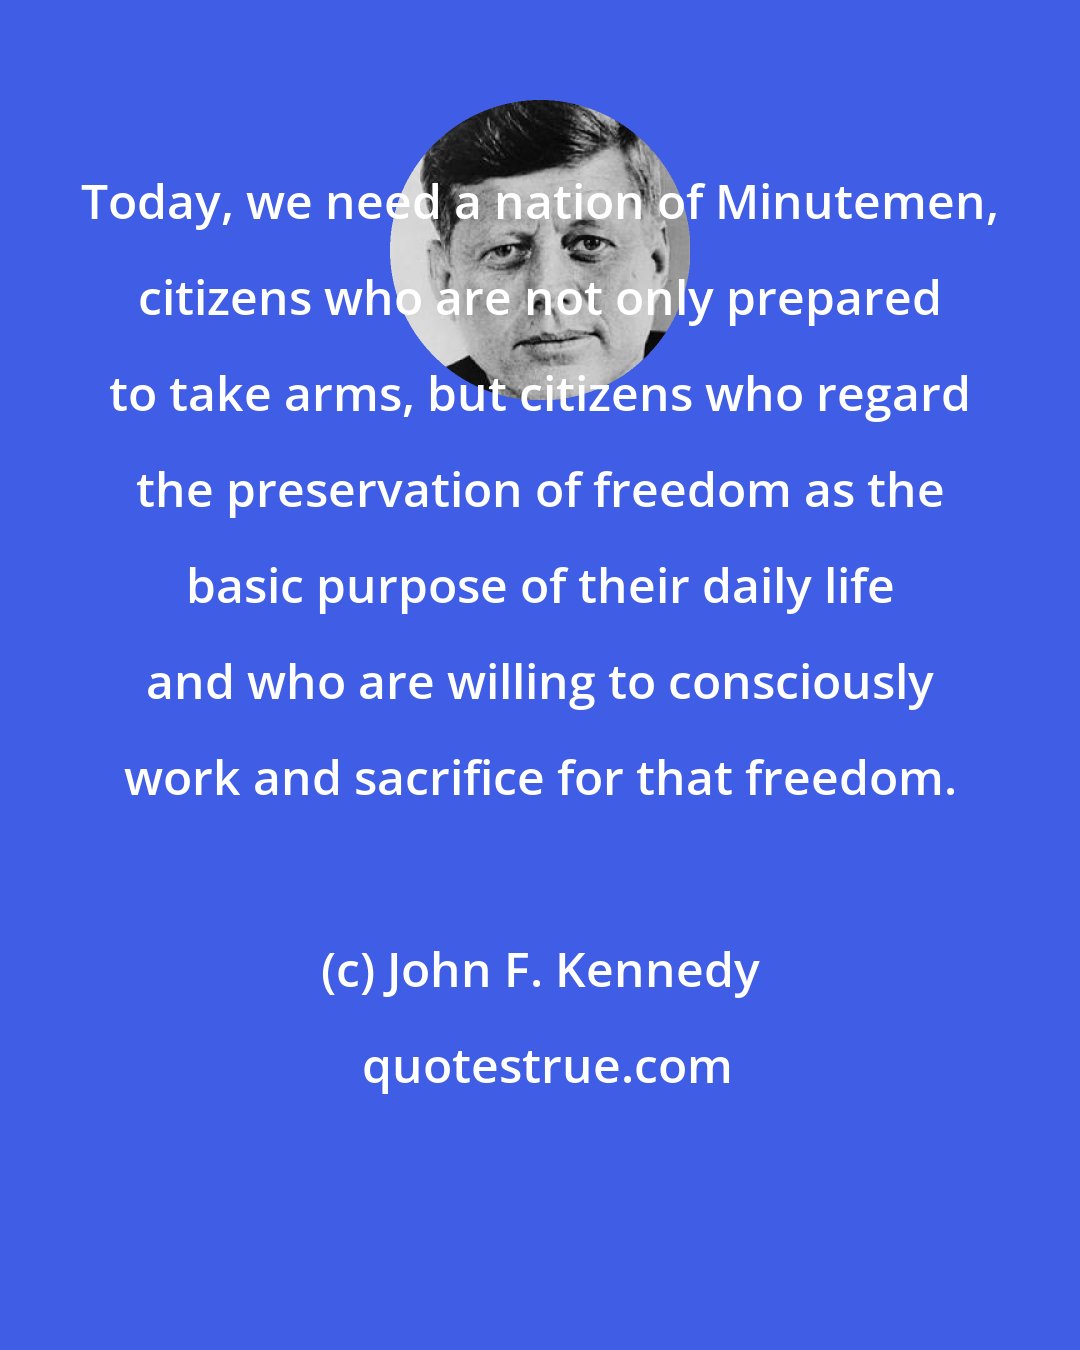 John F. Kennedy: Today, we need a nation of Minutemen, citizens who are not only prepared to take arms, but citizens who regard the preservation of freedom as the basic purpose of their daily life and who are willing to consciously work and sacrifice for that freedom.